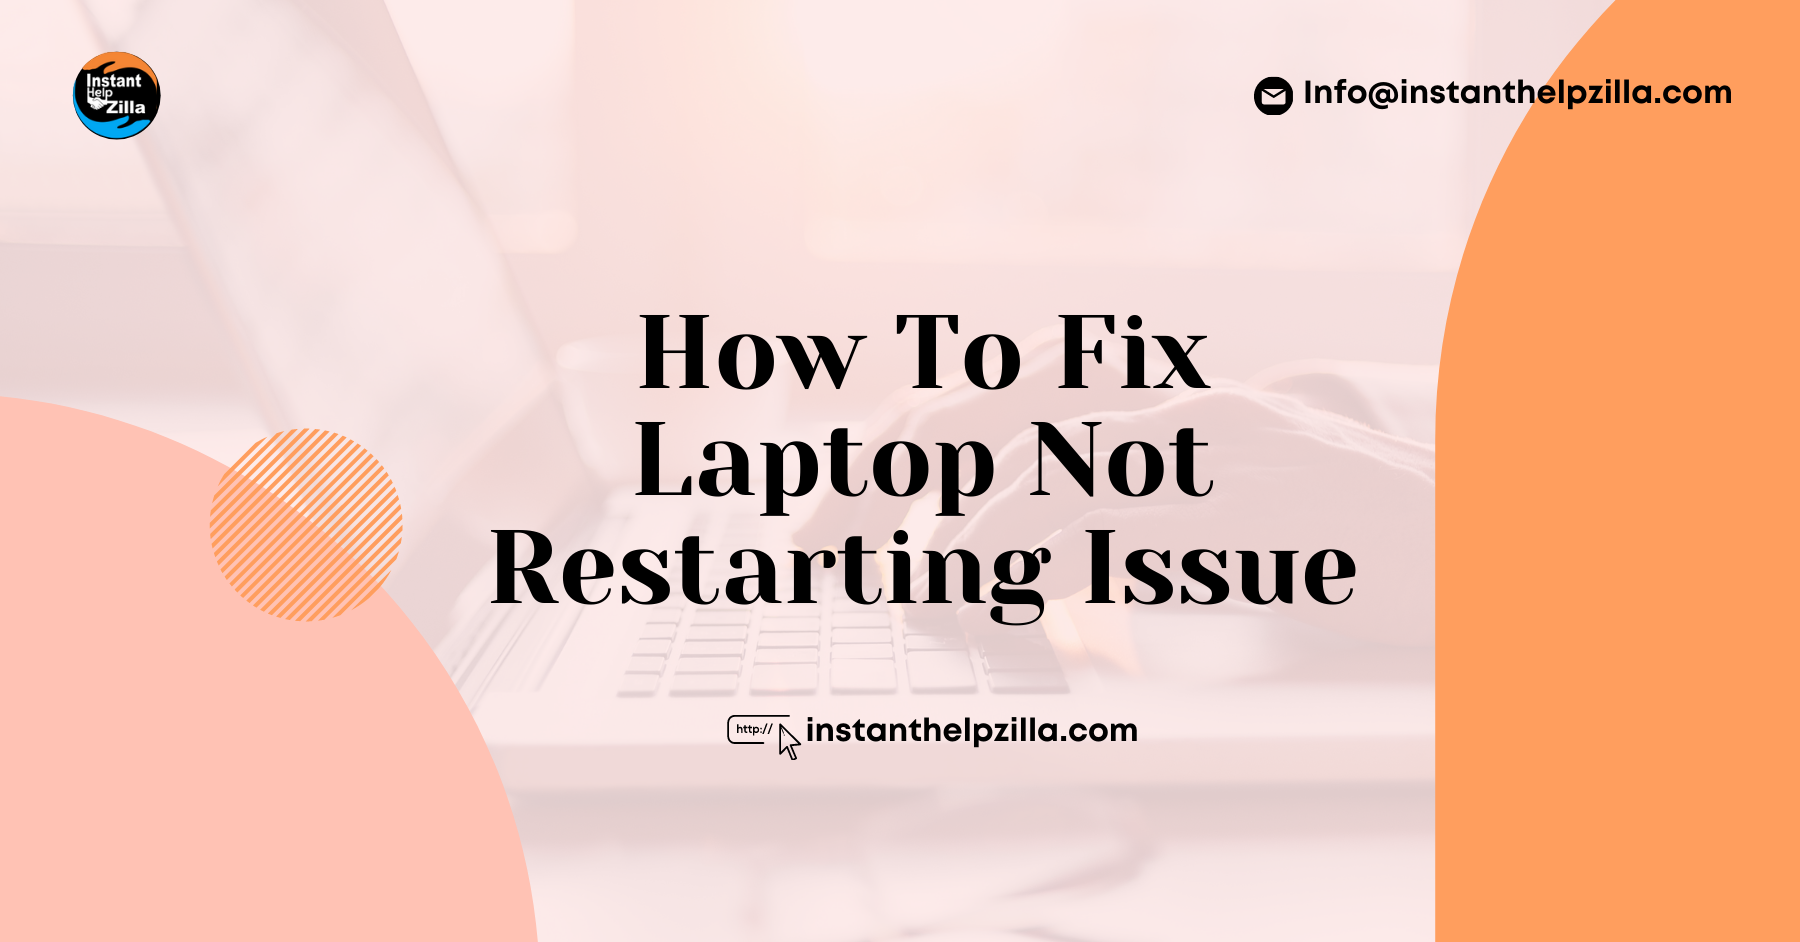 public/uploads/2021/02/How-to-Resolve-Laptop-Not-Restarting-Issue.png